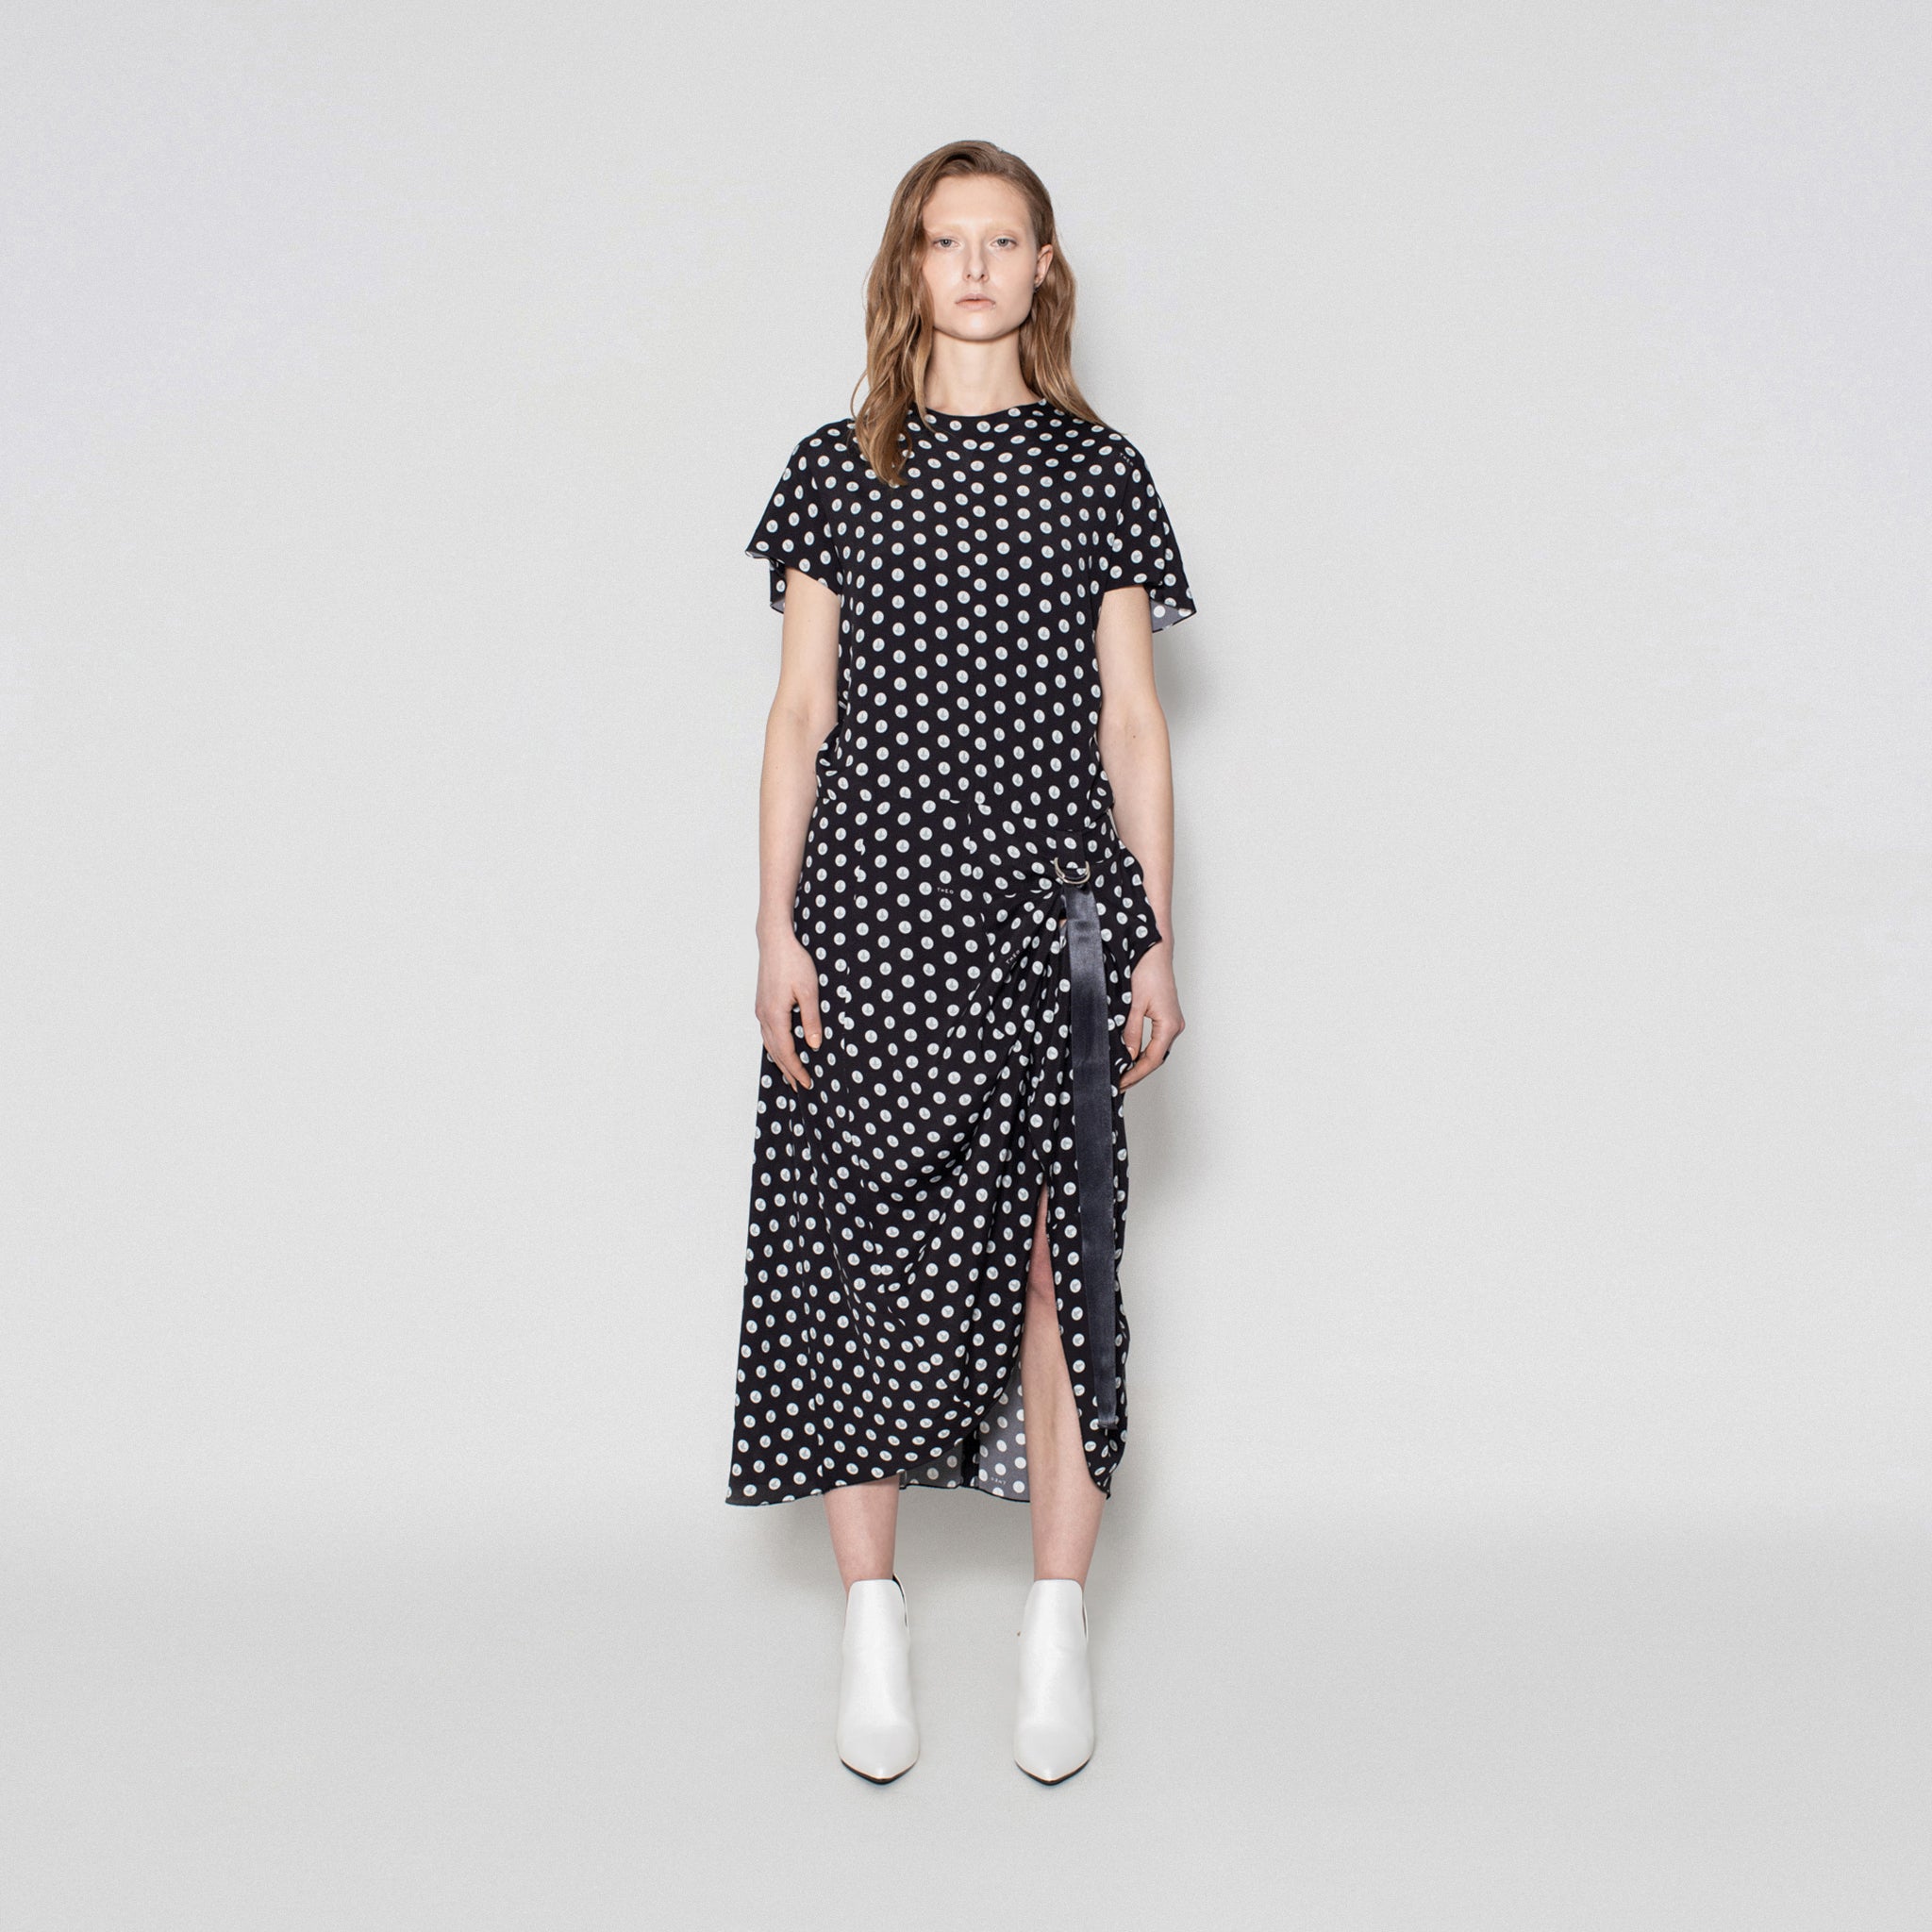 FLUID DRESS IN CREPE DE CHINE WITH POLKA PEARLS PRINT WITH MARTINGALE DETAIL